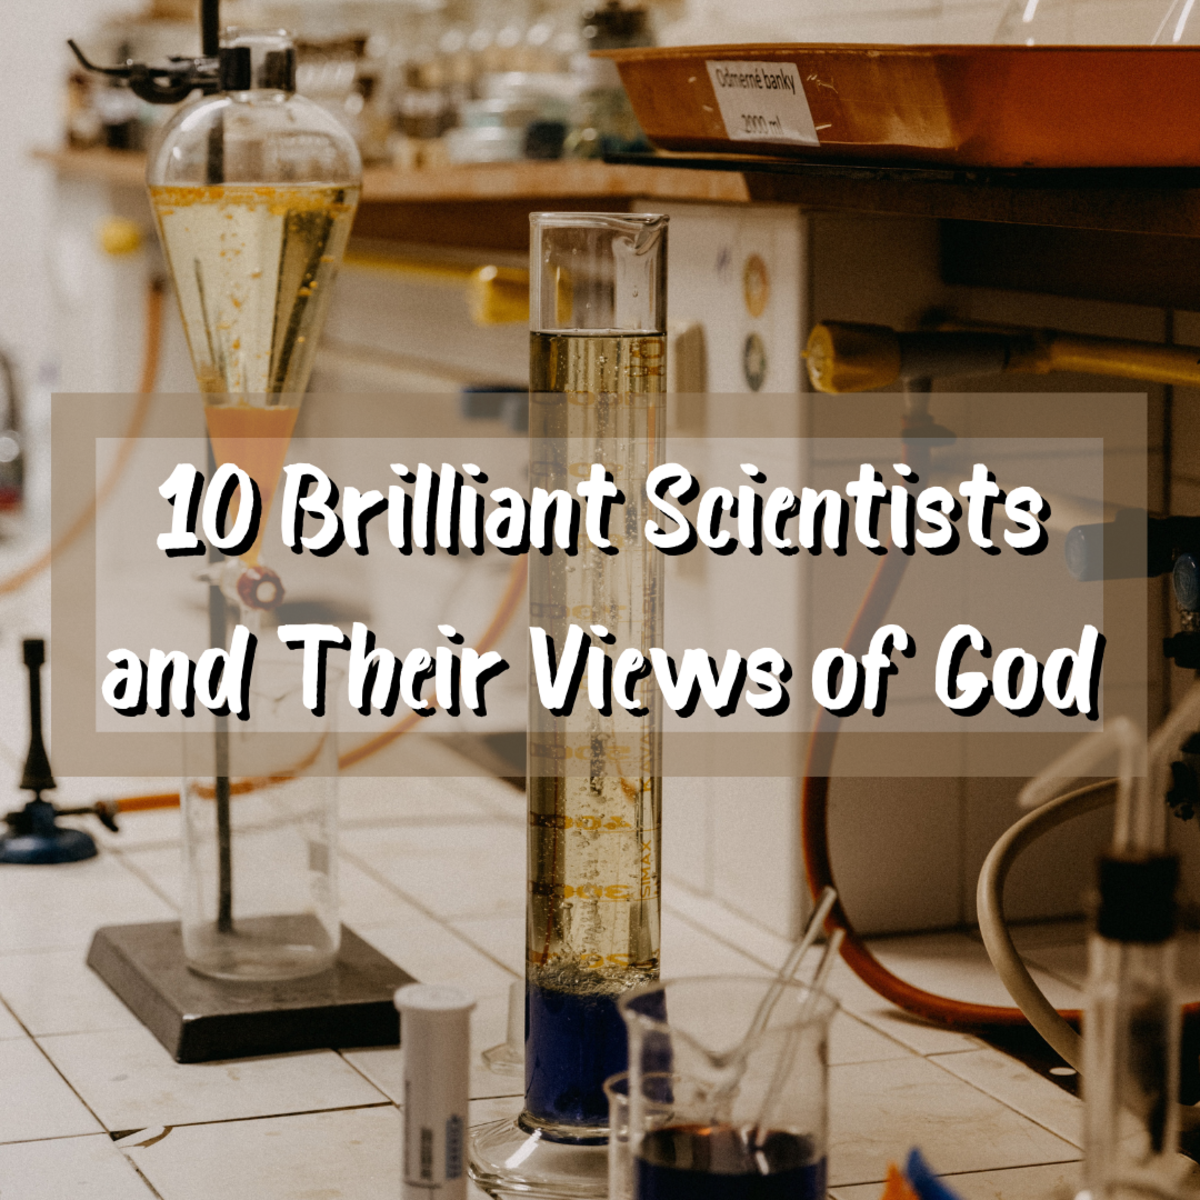 10 Brilliant Scientists and Their Views of God